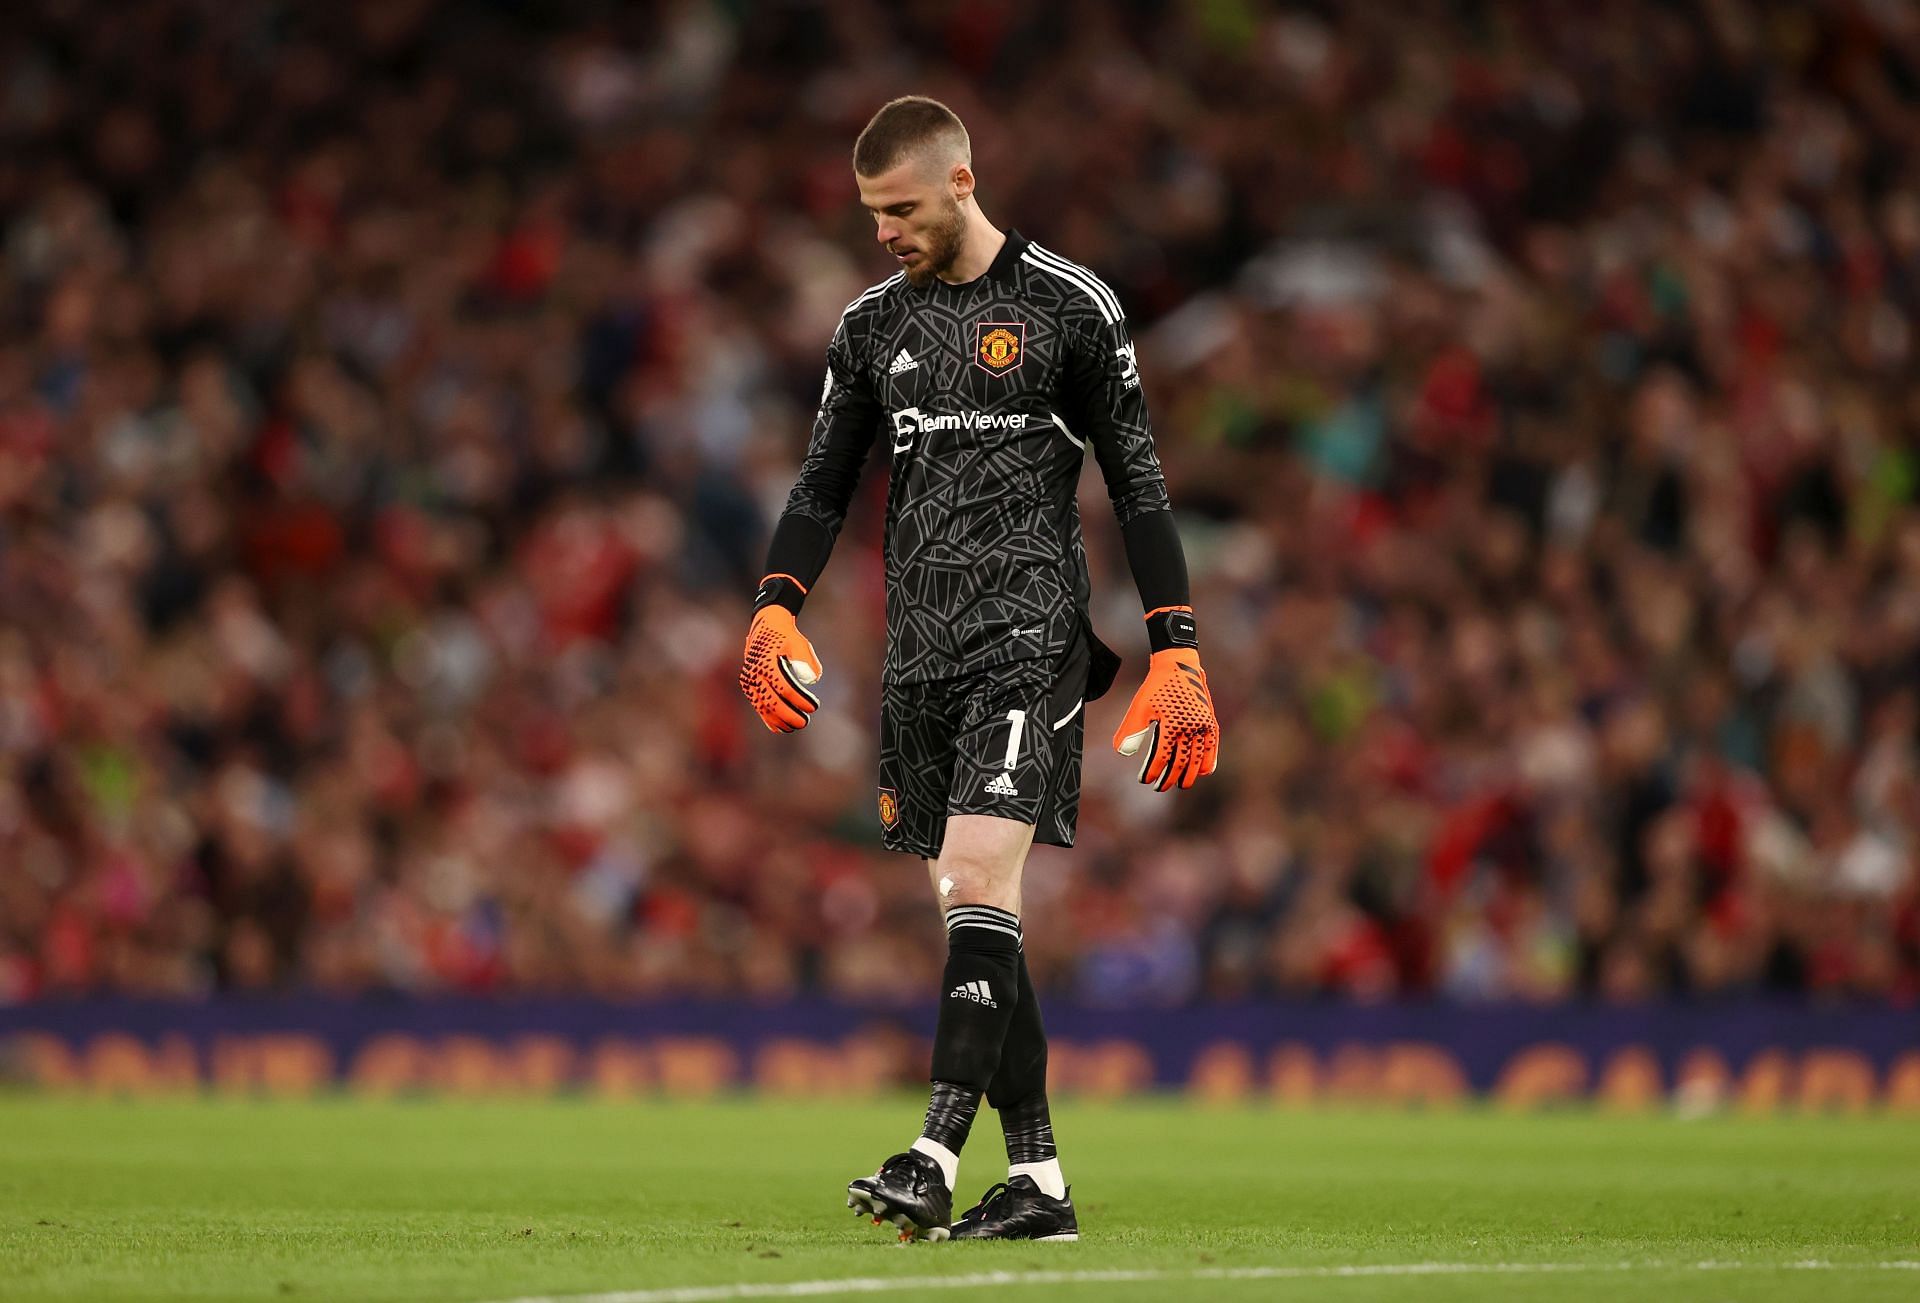 David de Gea has been a free agent since his departure from Manchester United.